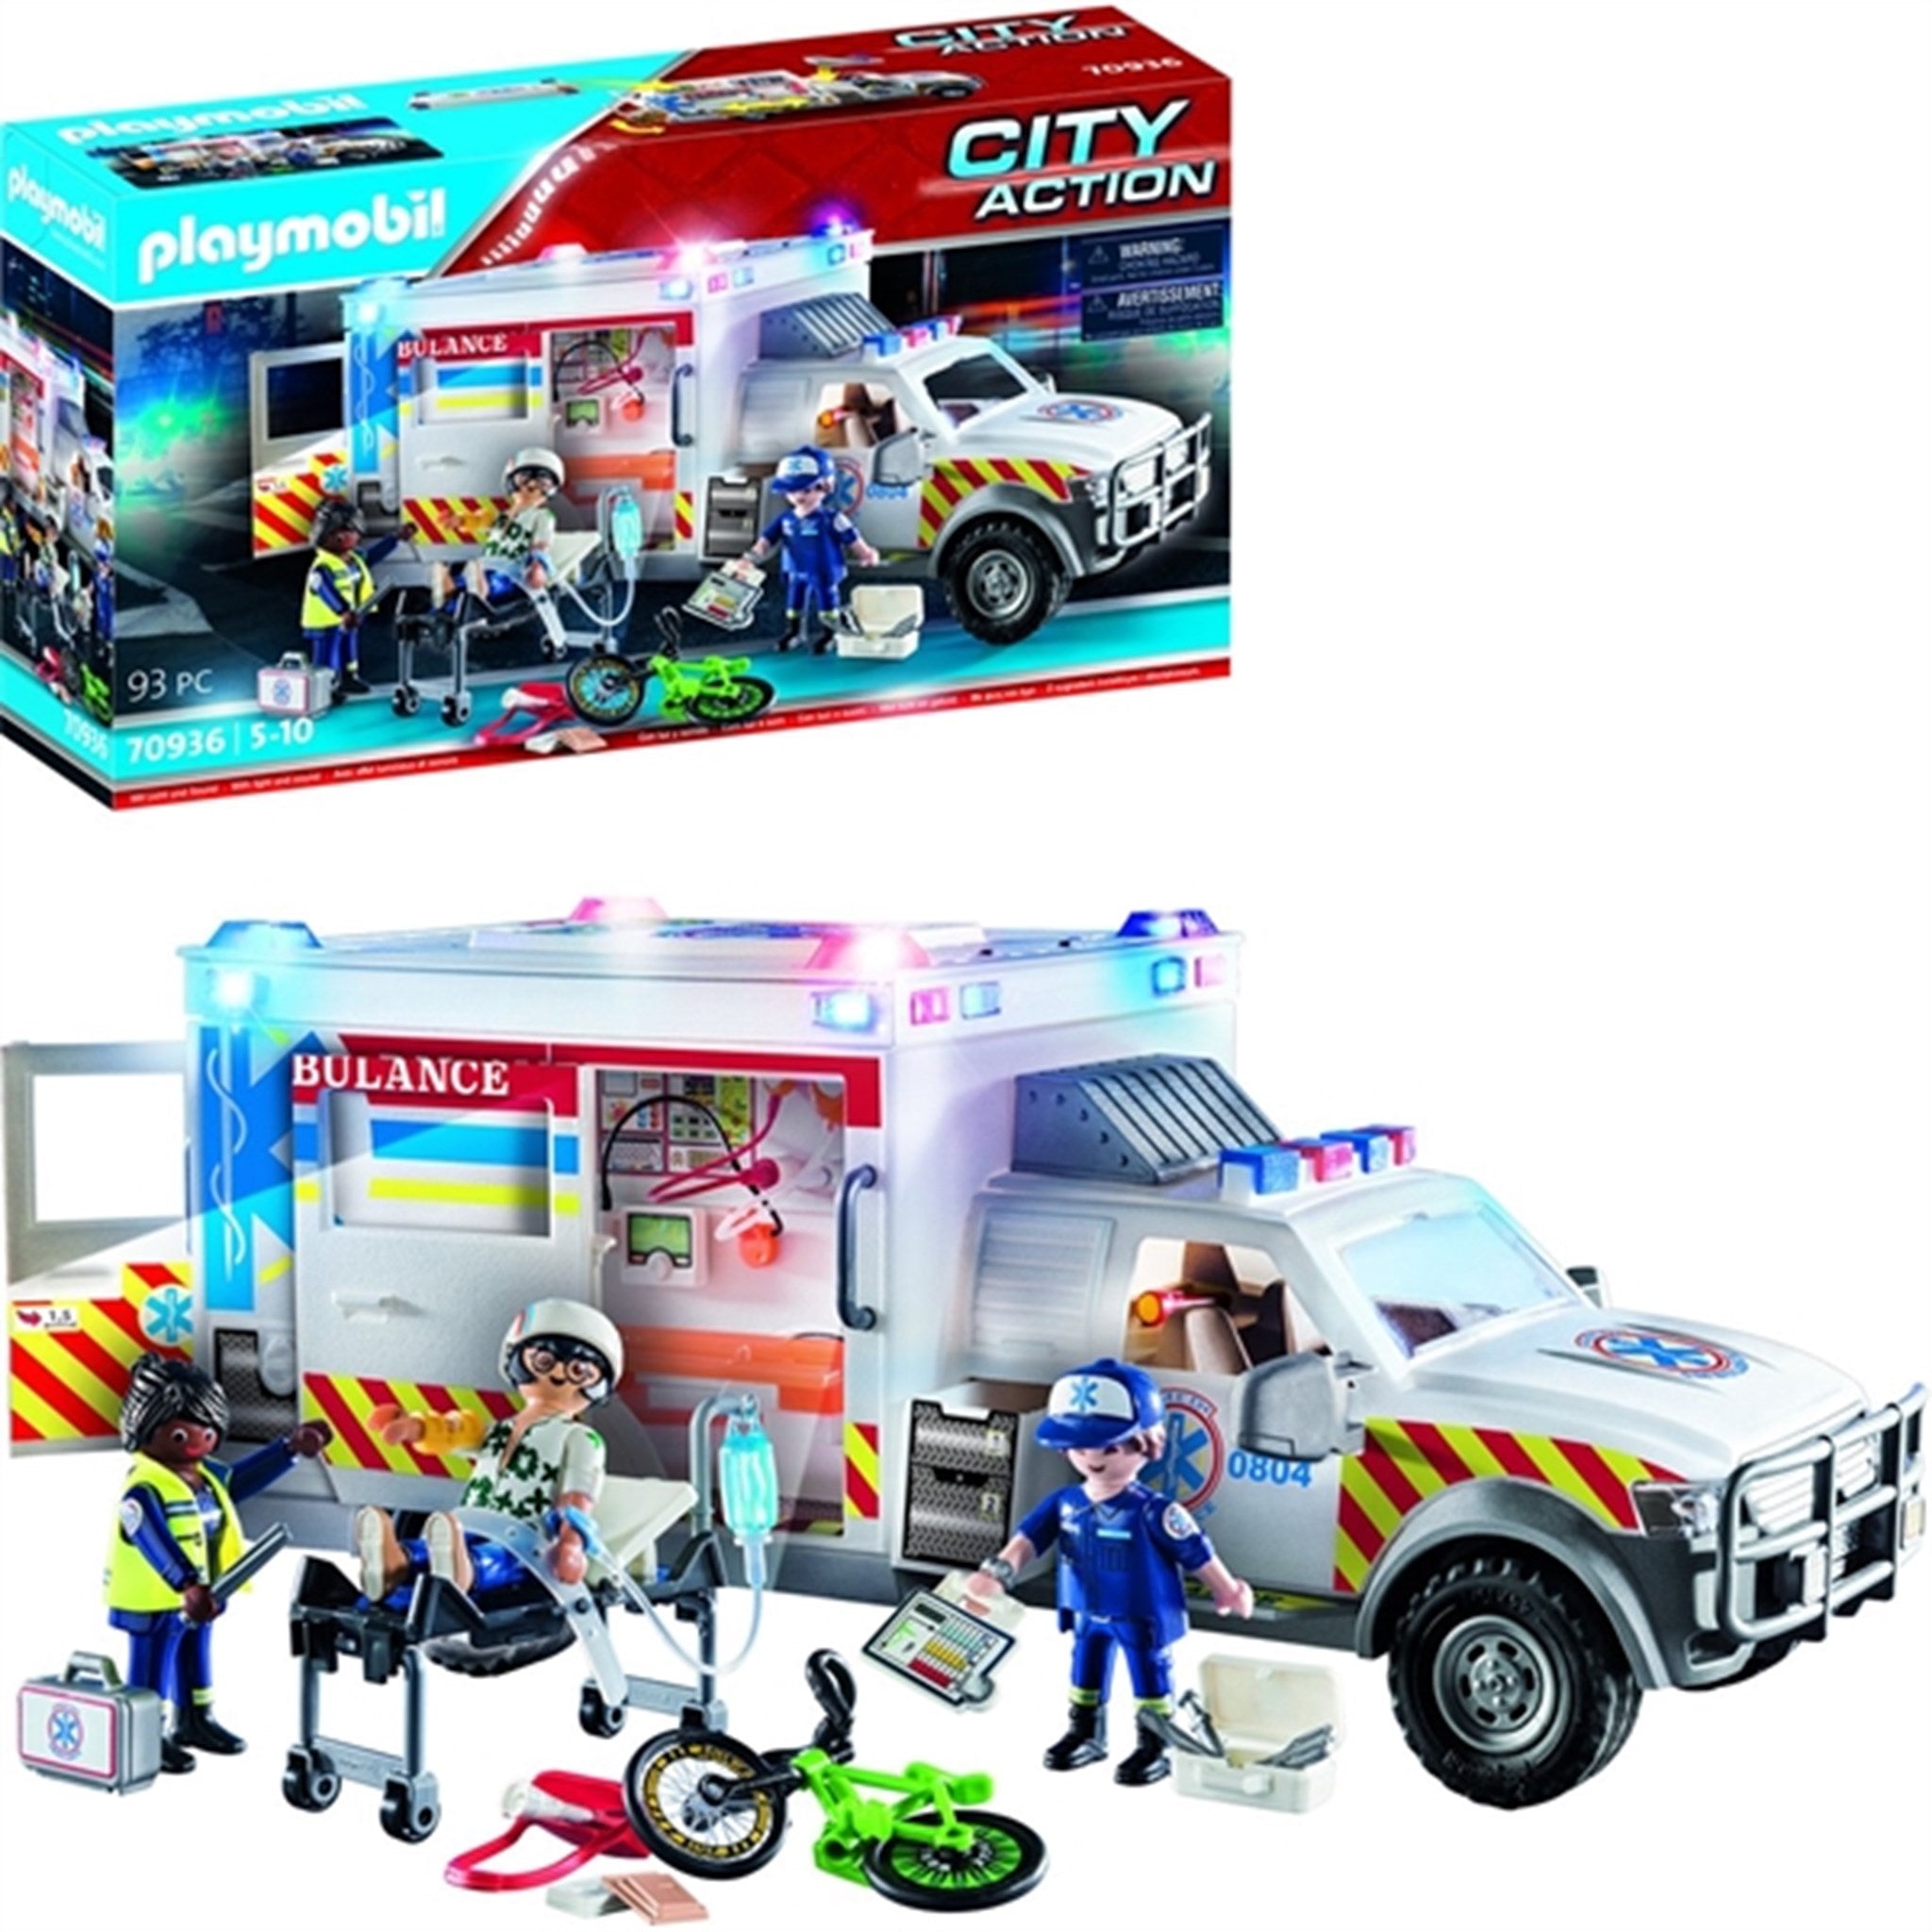 Playmobil® City Action - US Ambulance with Lights and Sound 7